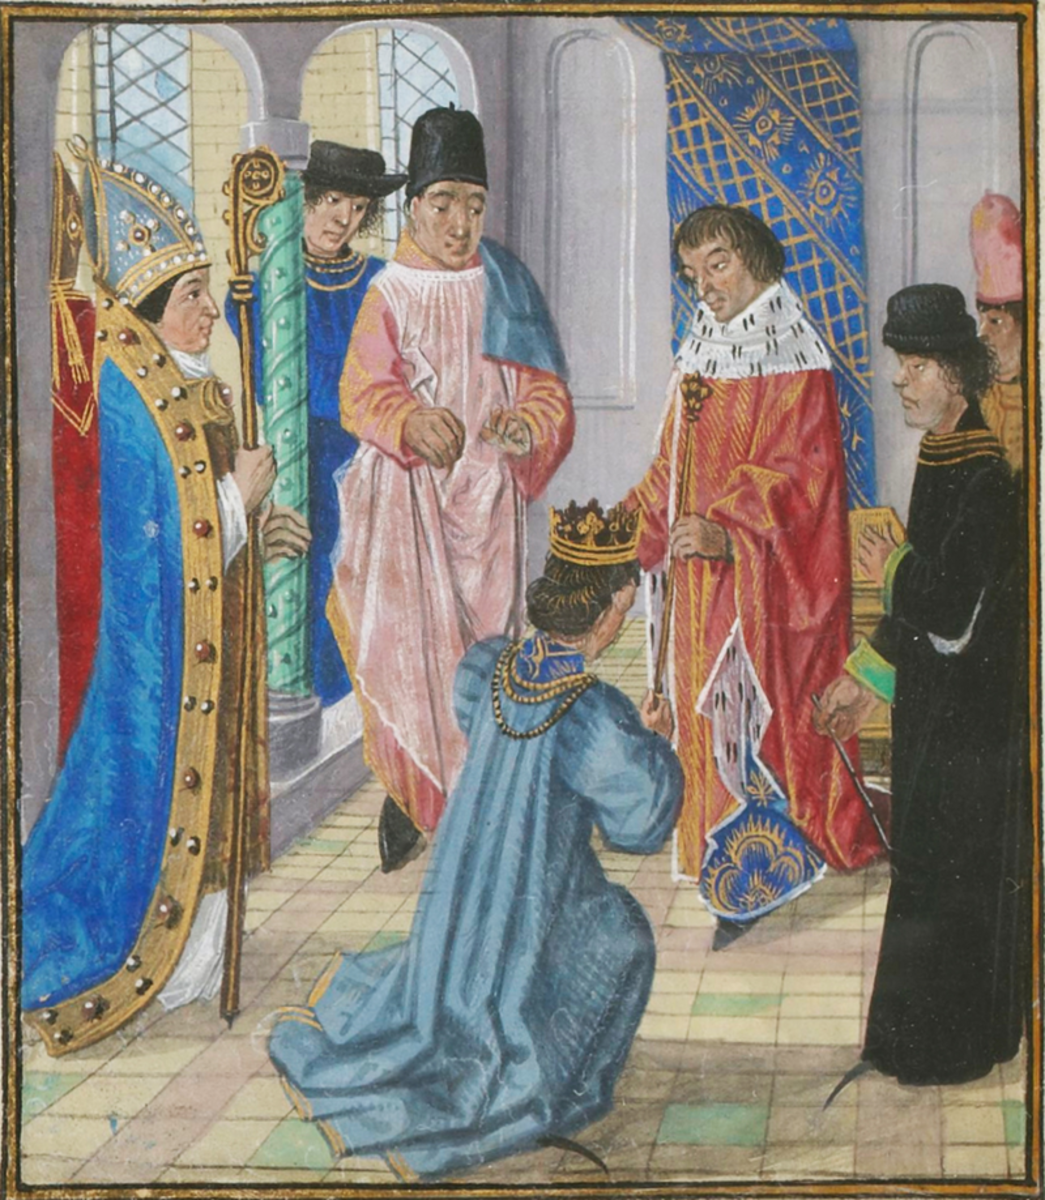 Richard II depicted during his abdication in 1399